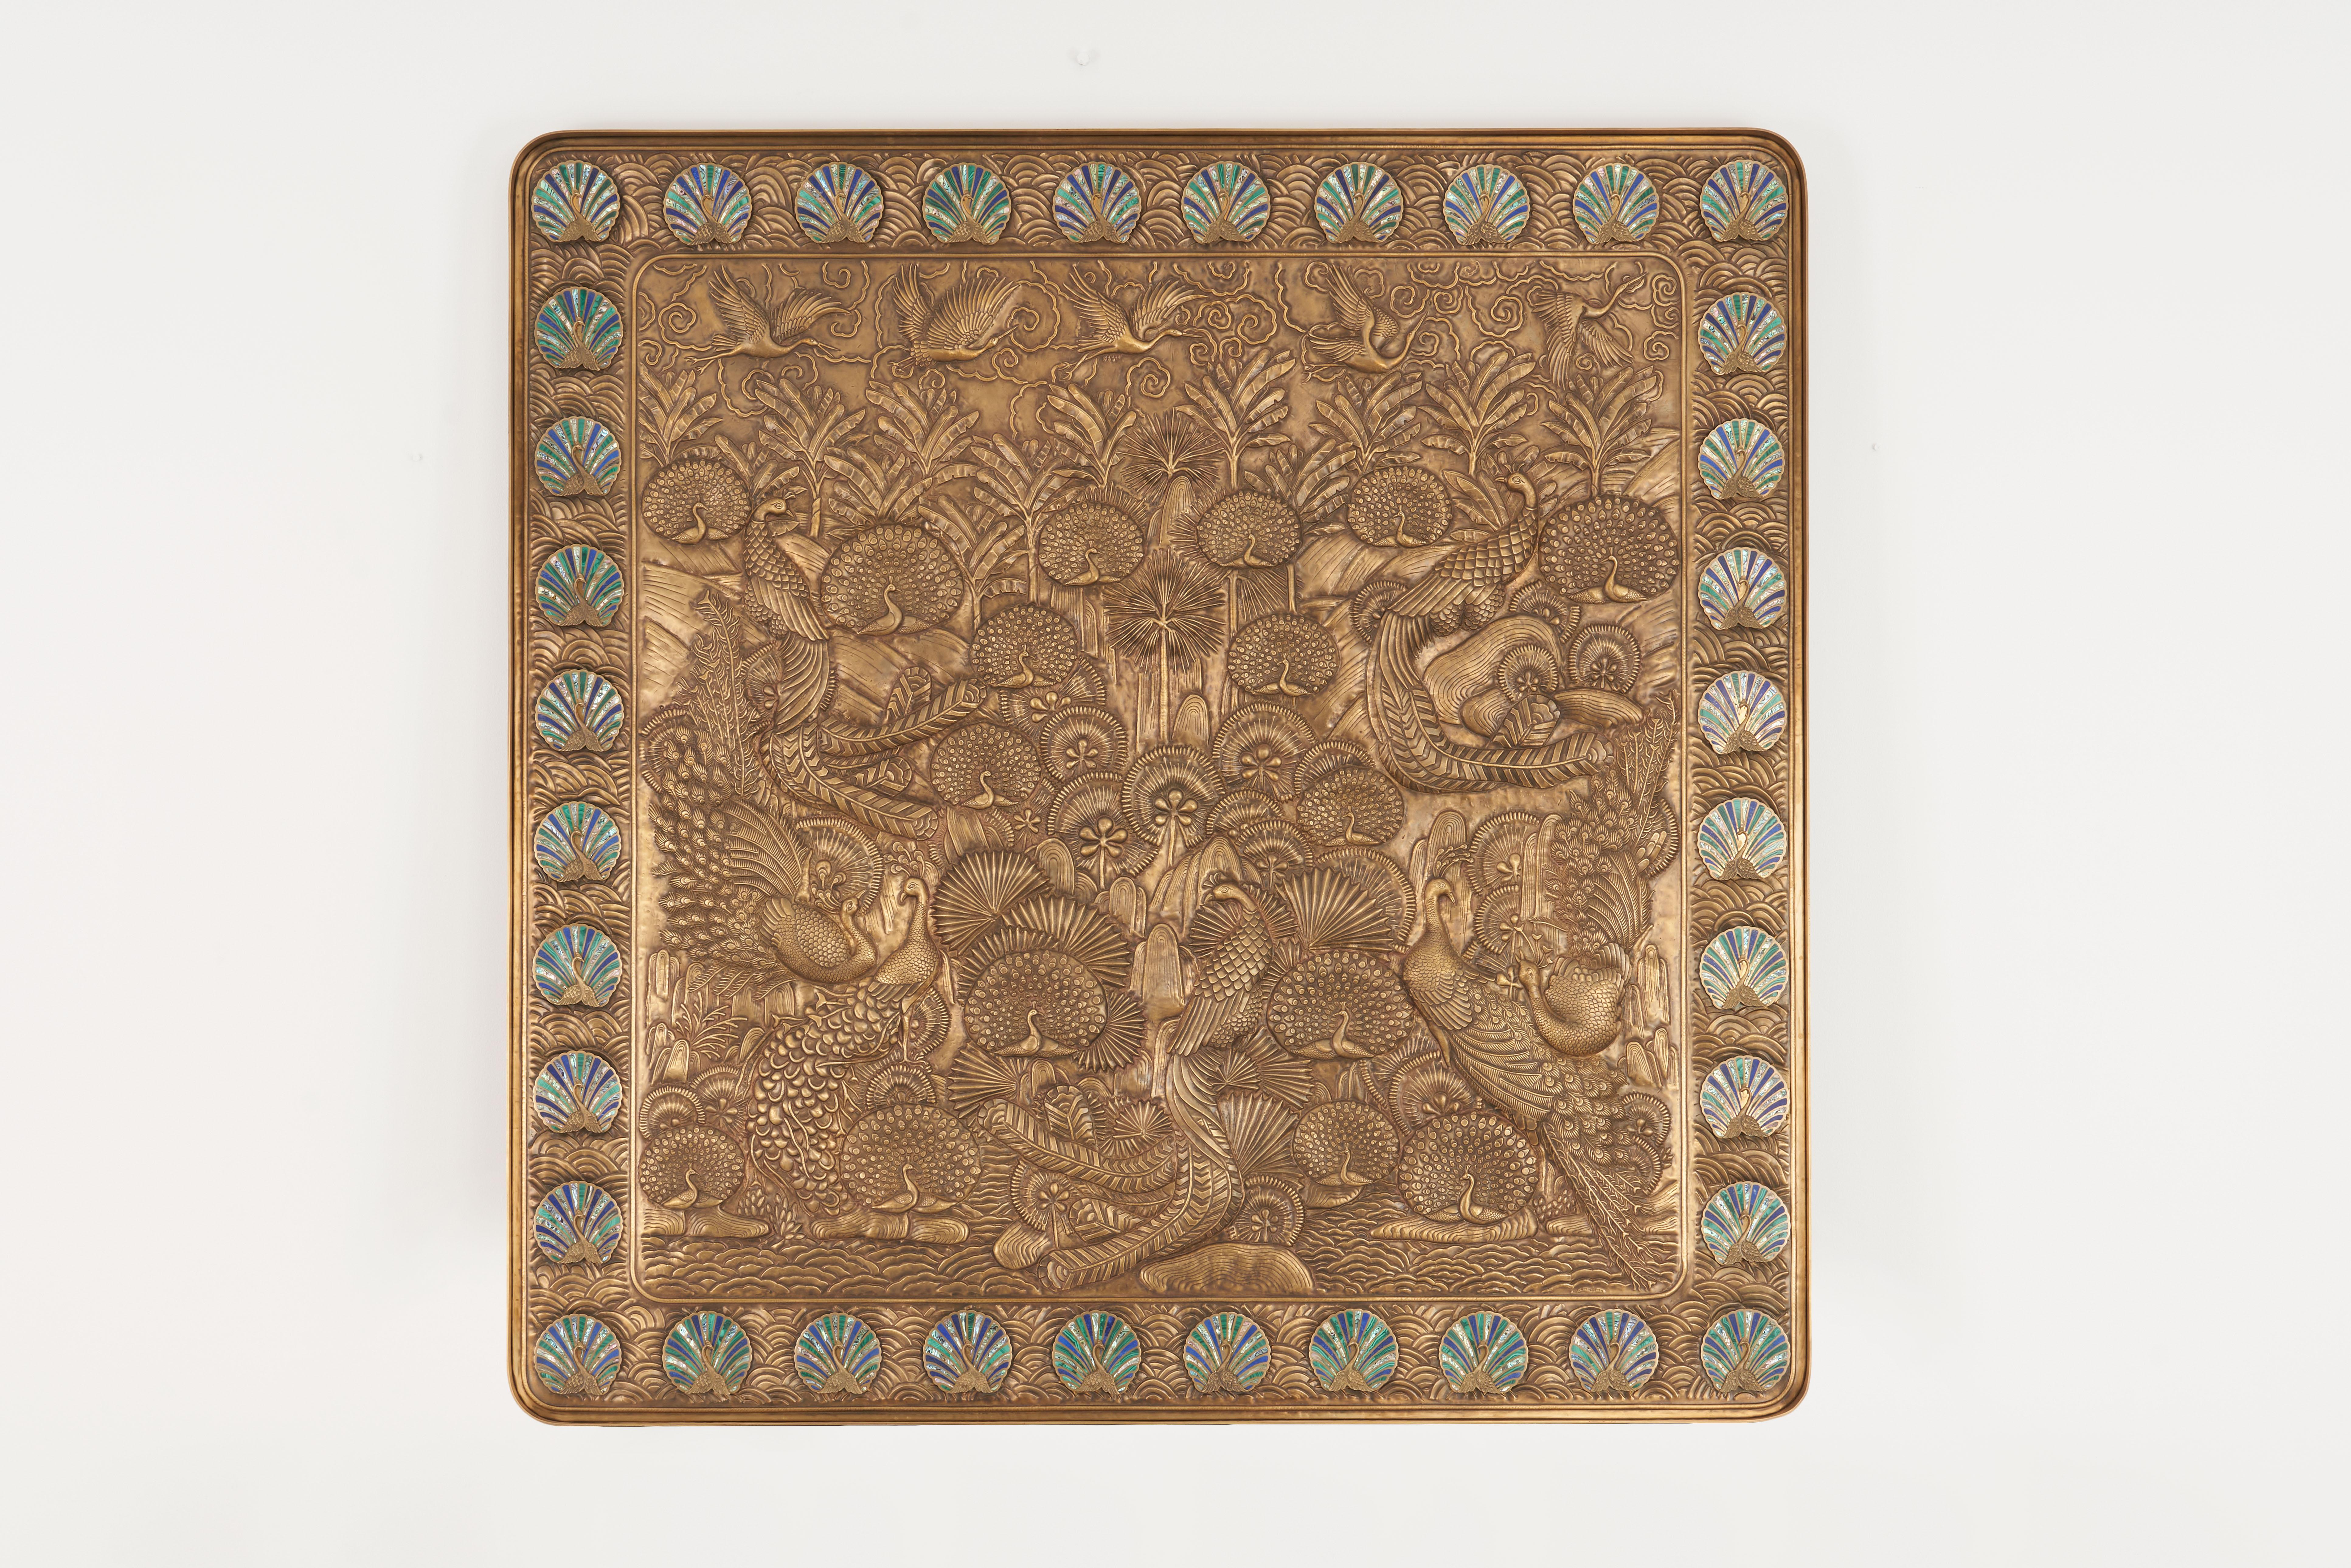 As the name of this brass wall panel suggests, the inspiration here is the Pichwai painting (literally translating to ‘hanging from the back’ in Sankskrit). The peacock is at the heart of this artwork, carved into the brass using the